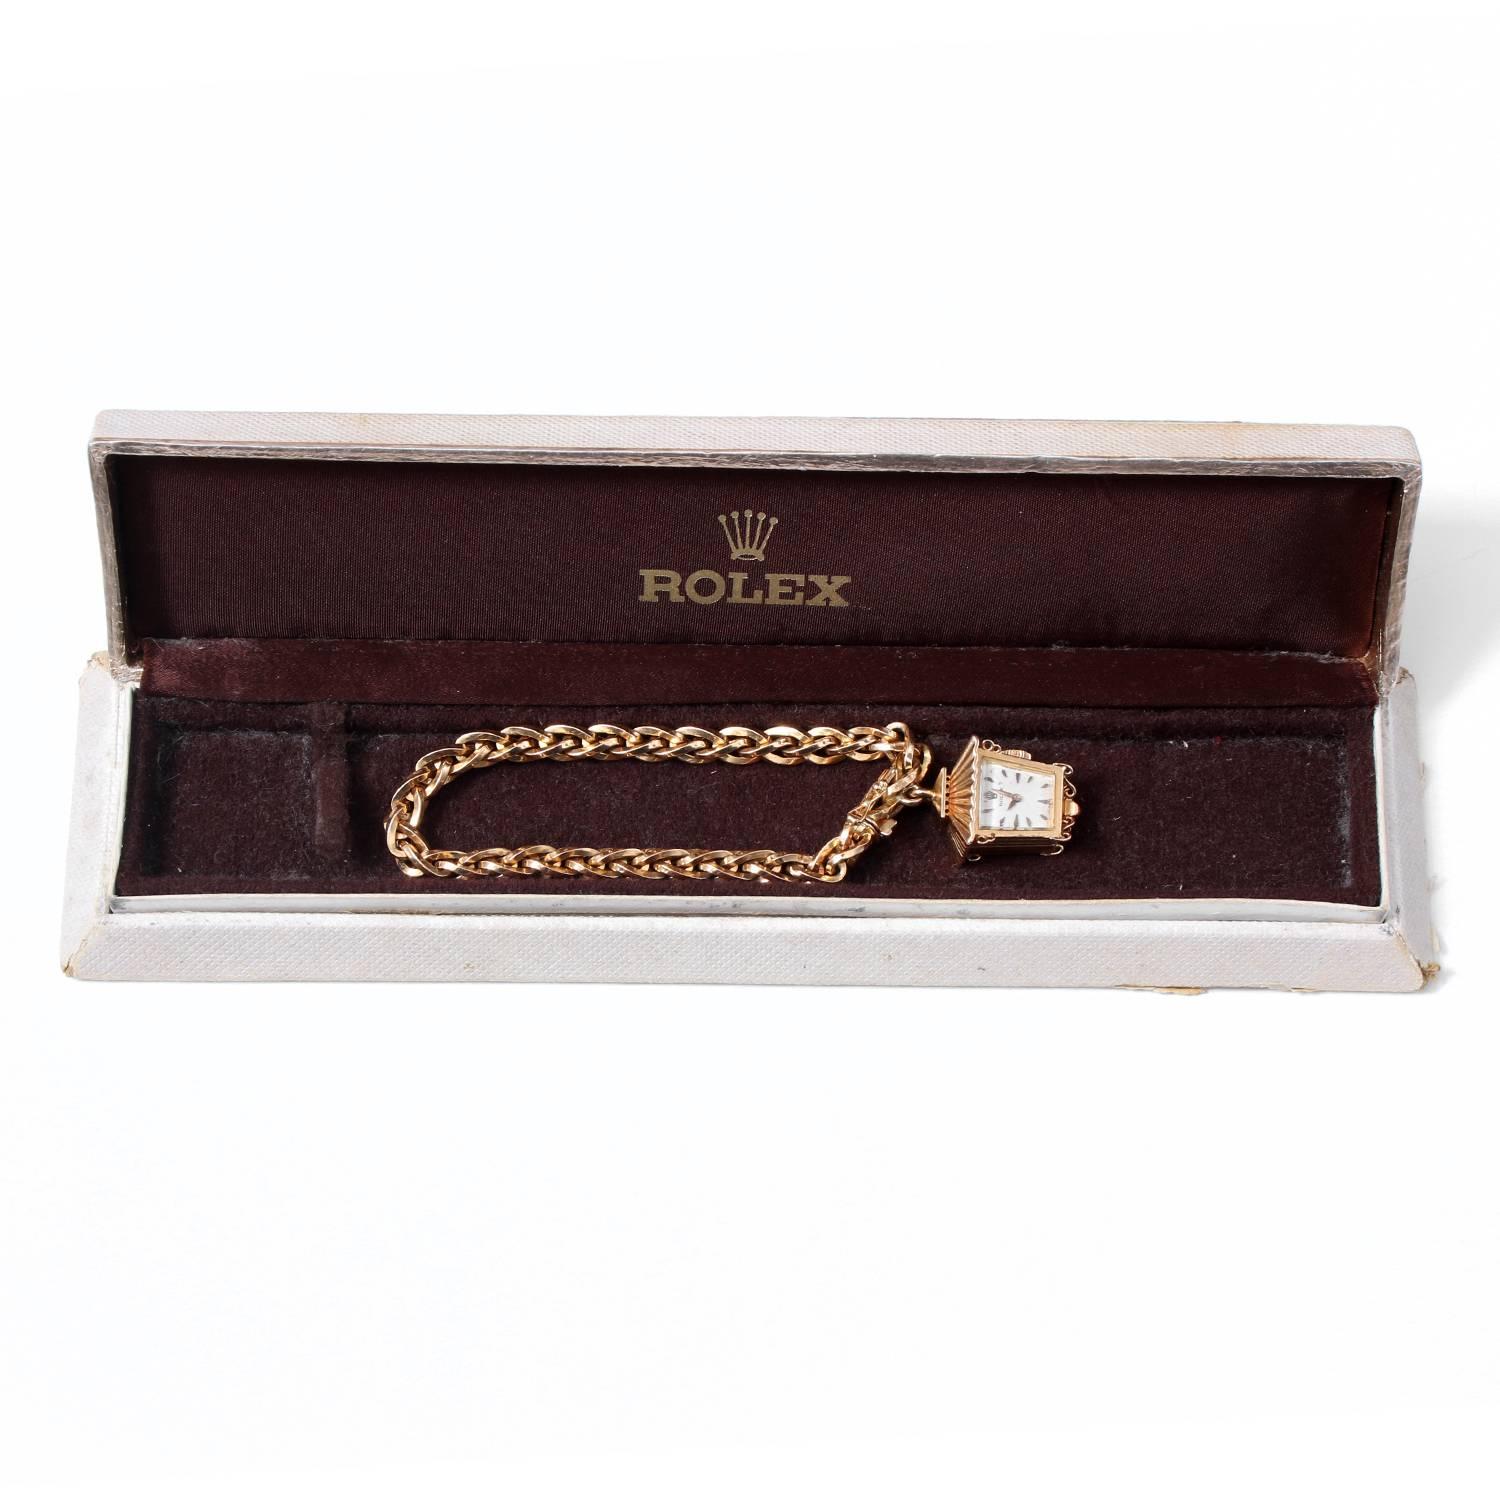 Rolex Lantern Charm Bracelet Watch Circa 1960's -  Manual wind. 18K Yellow Gold; red enamel back. White dial with stink hour markers. 18K Yellow Gold link bracelet. Pre-owned with Rolex box. Case and bracelet are of Rolex manufacture. Extremely